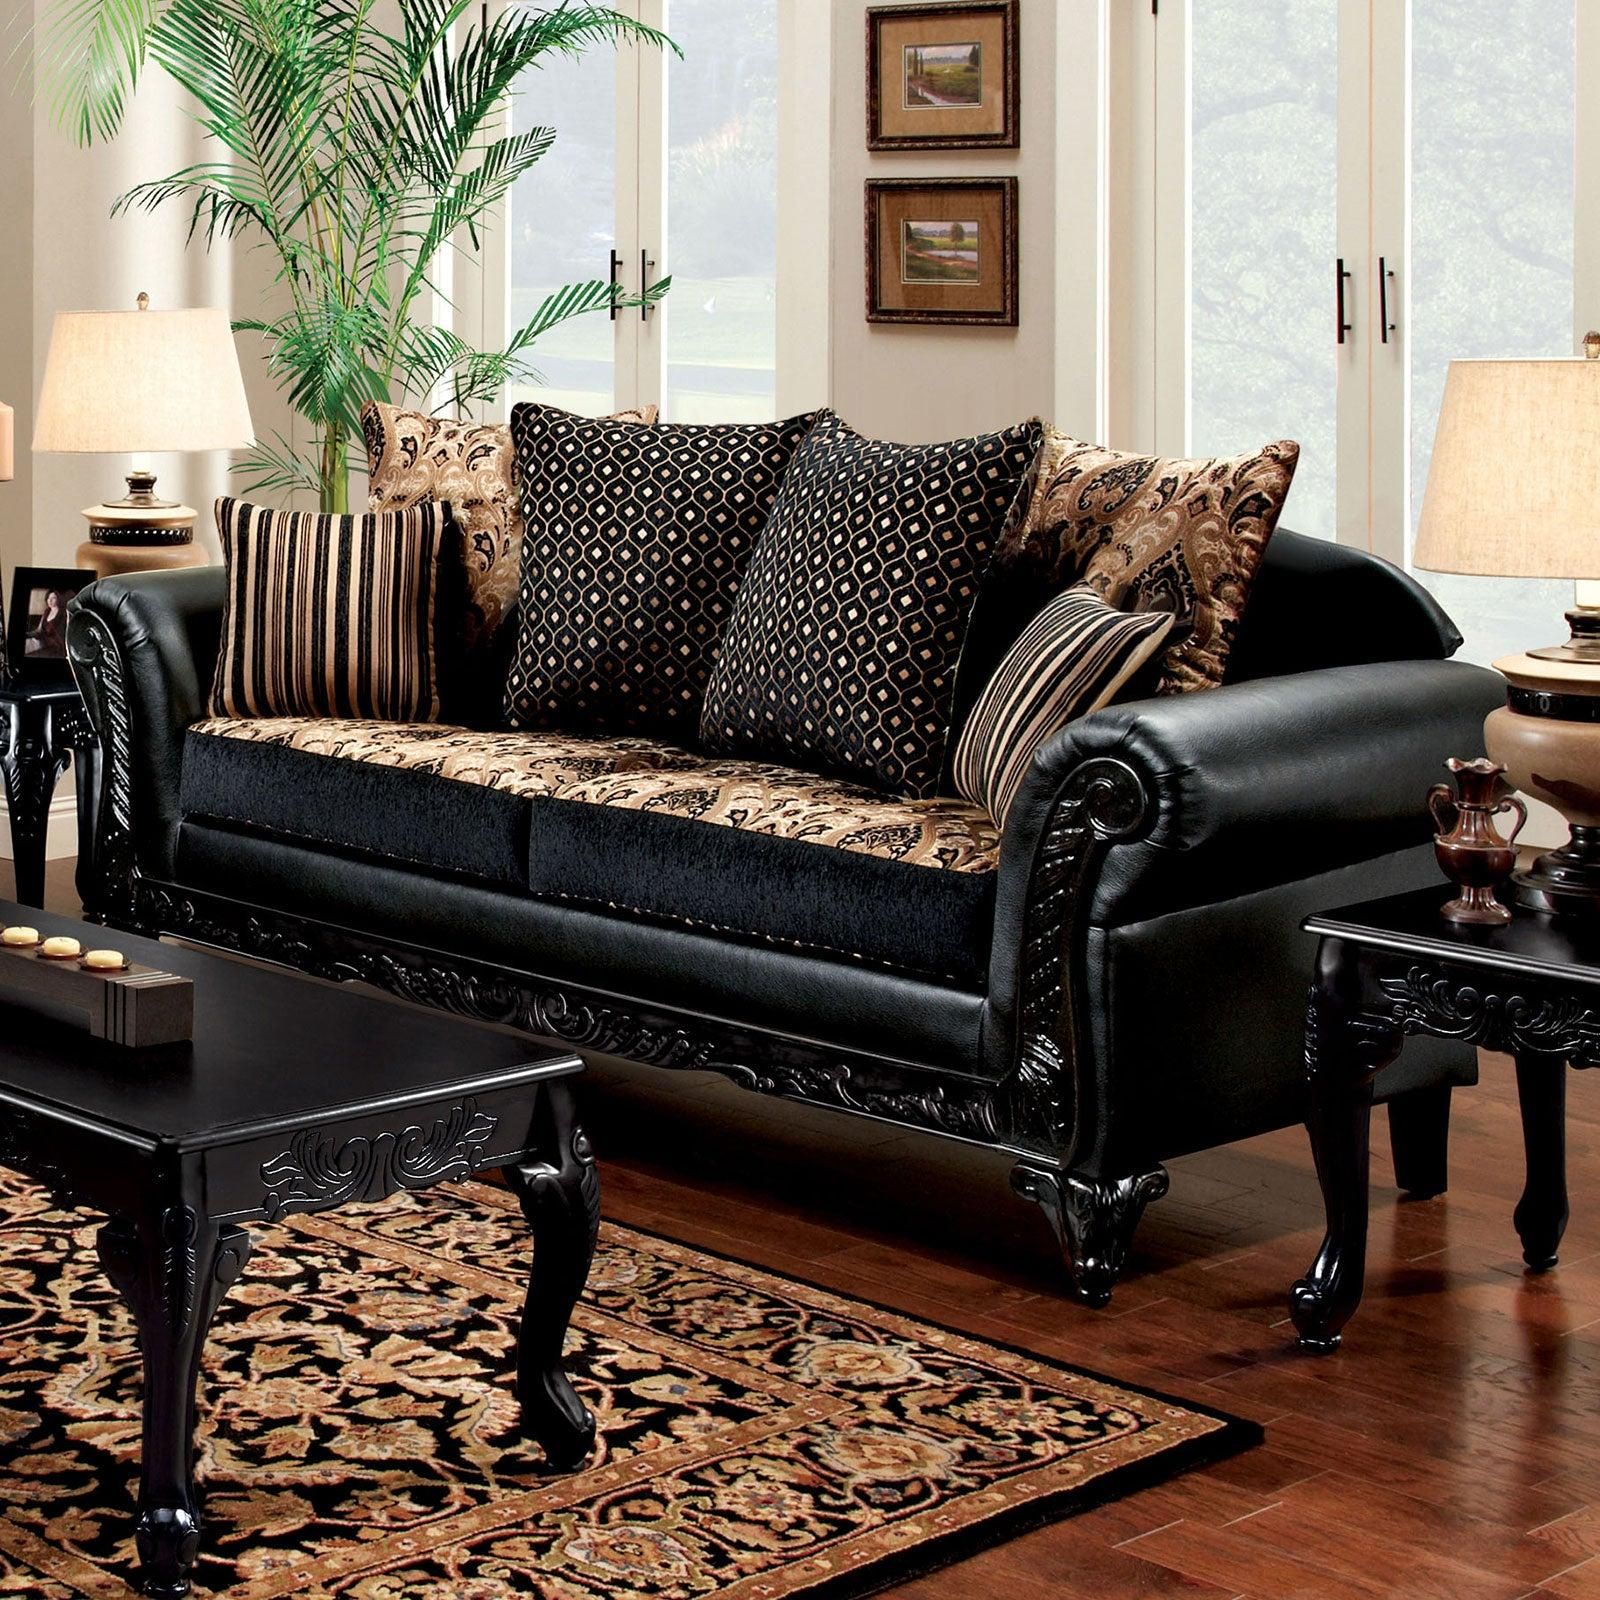 Black & Tan Chenille Sofa Theodora Sm7505n Sf Foa Traditional – Buy Online  On Ny Furniture Outlet With Regard To Traditional Black Fabric Sofas (View 3 of 15)